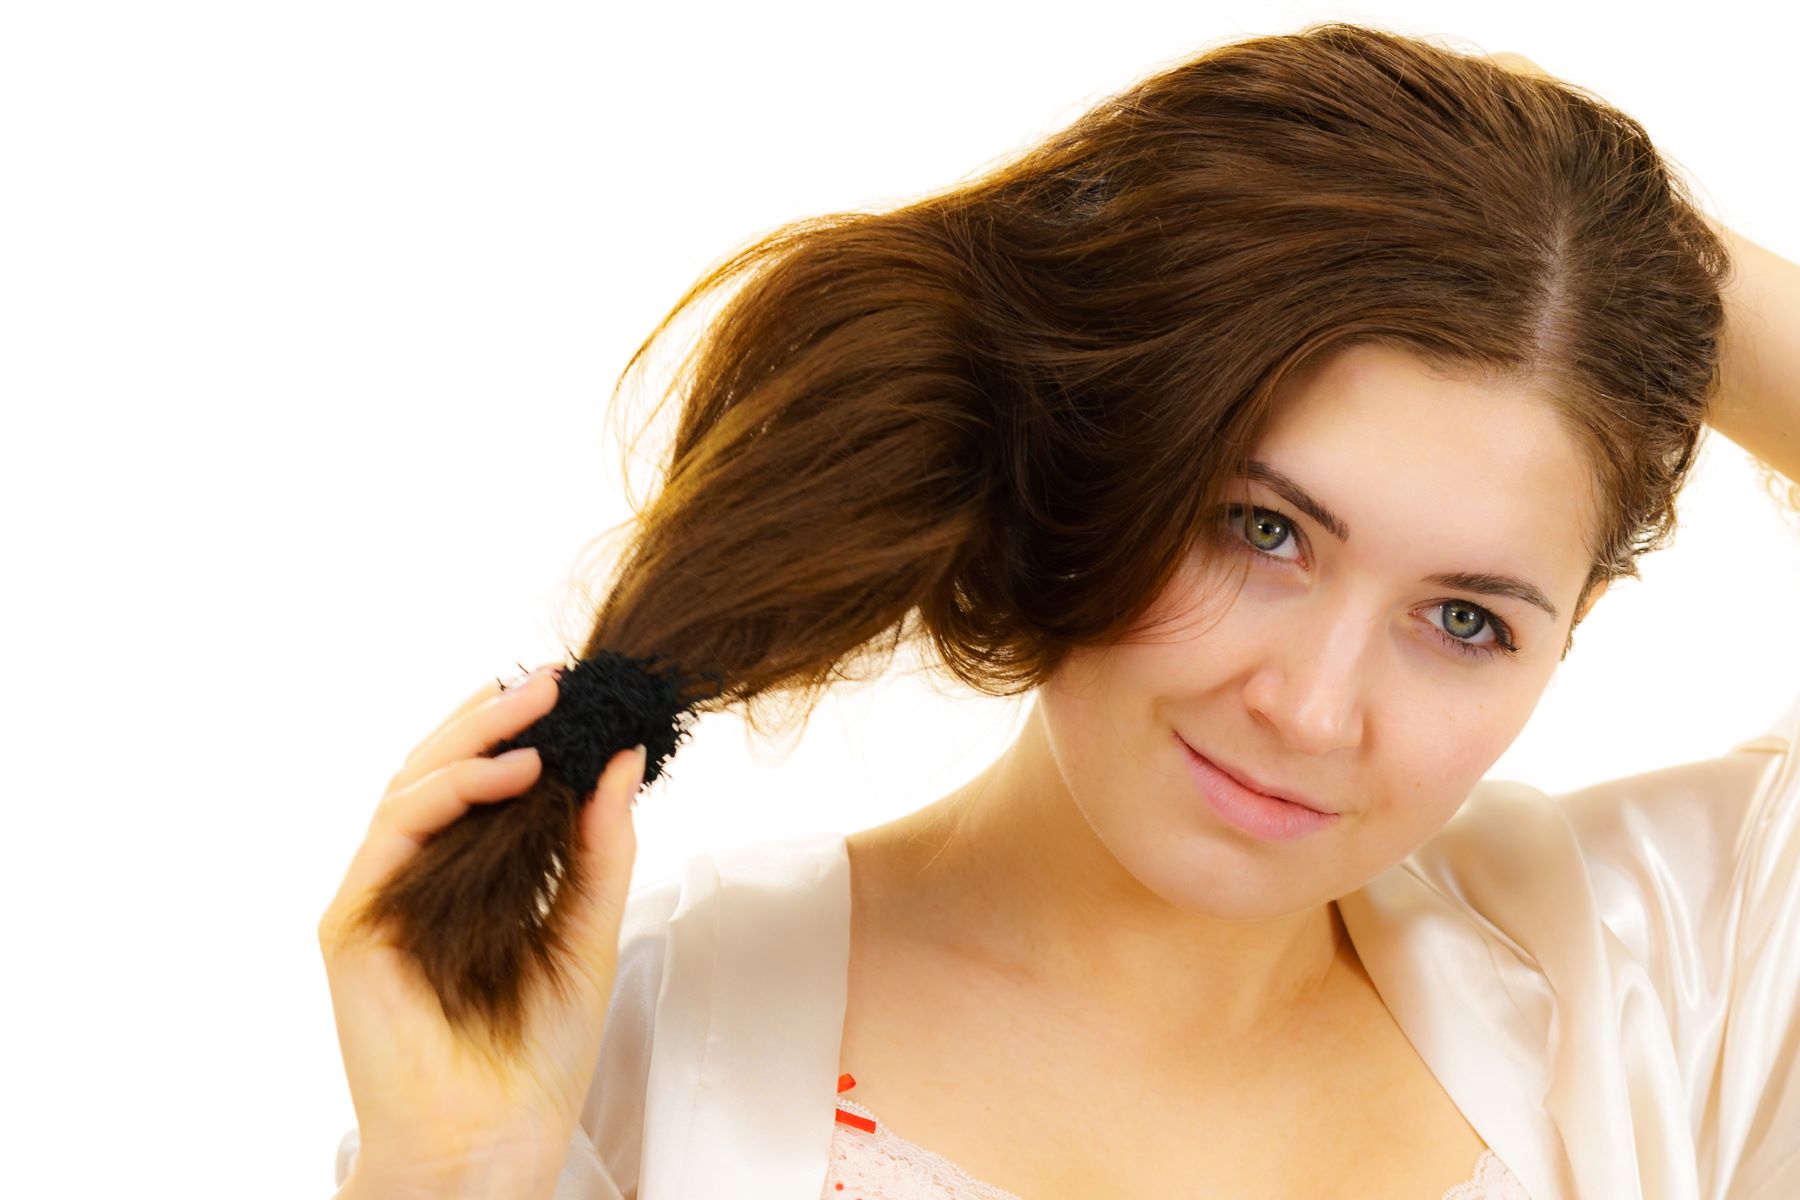 Woman preventing temple hair loss by untying her hair